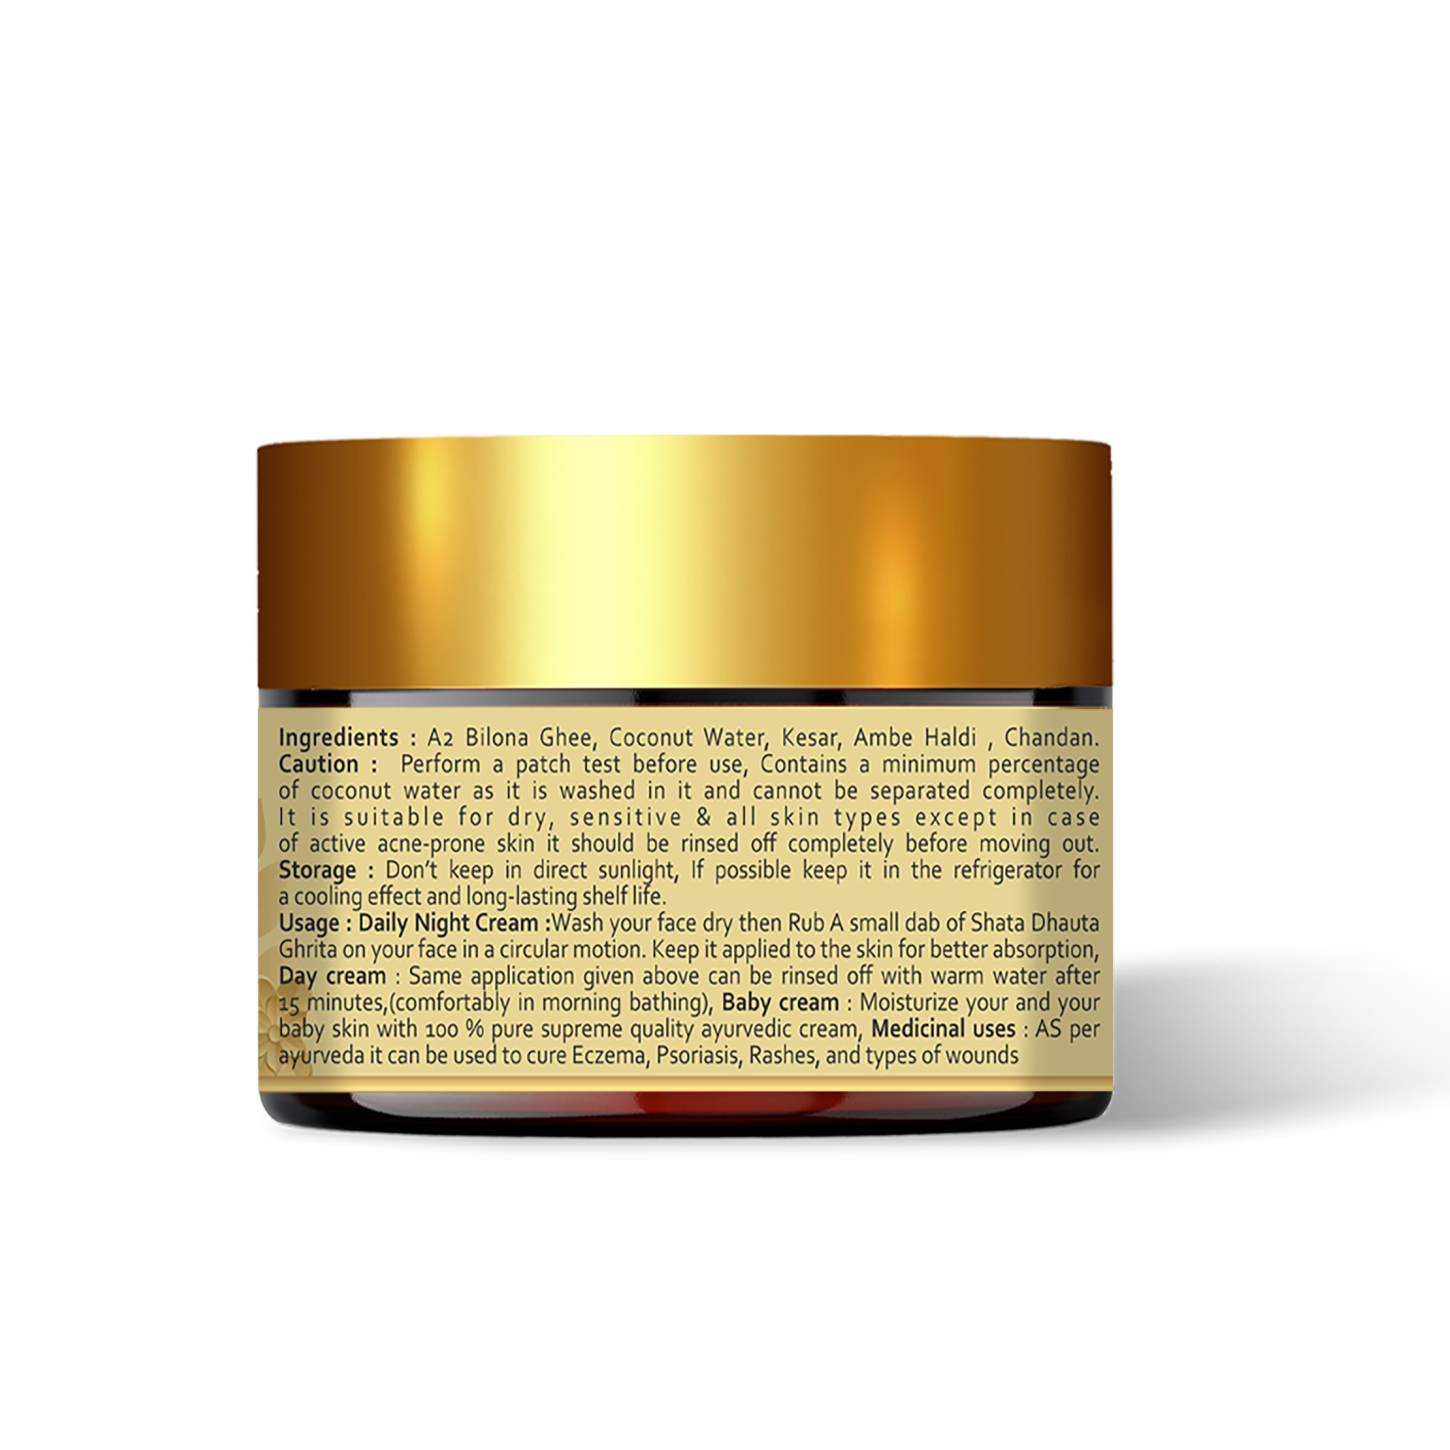 Shata Dhauta Ghritah 100 Times Washed Ghee Free Virgin Coconut Oil (One Of The Supreme Skin-Beautifying Natural Cream) 40 Gm